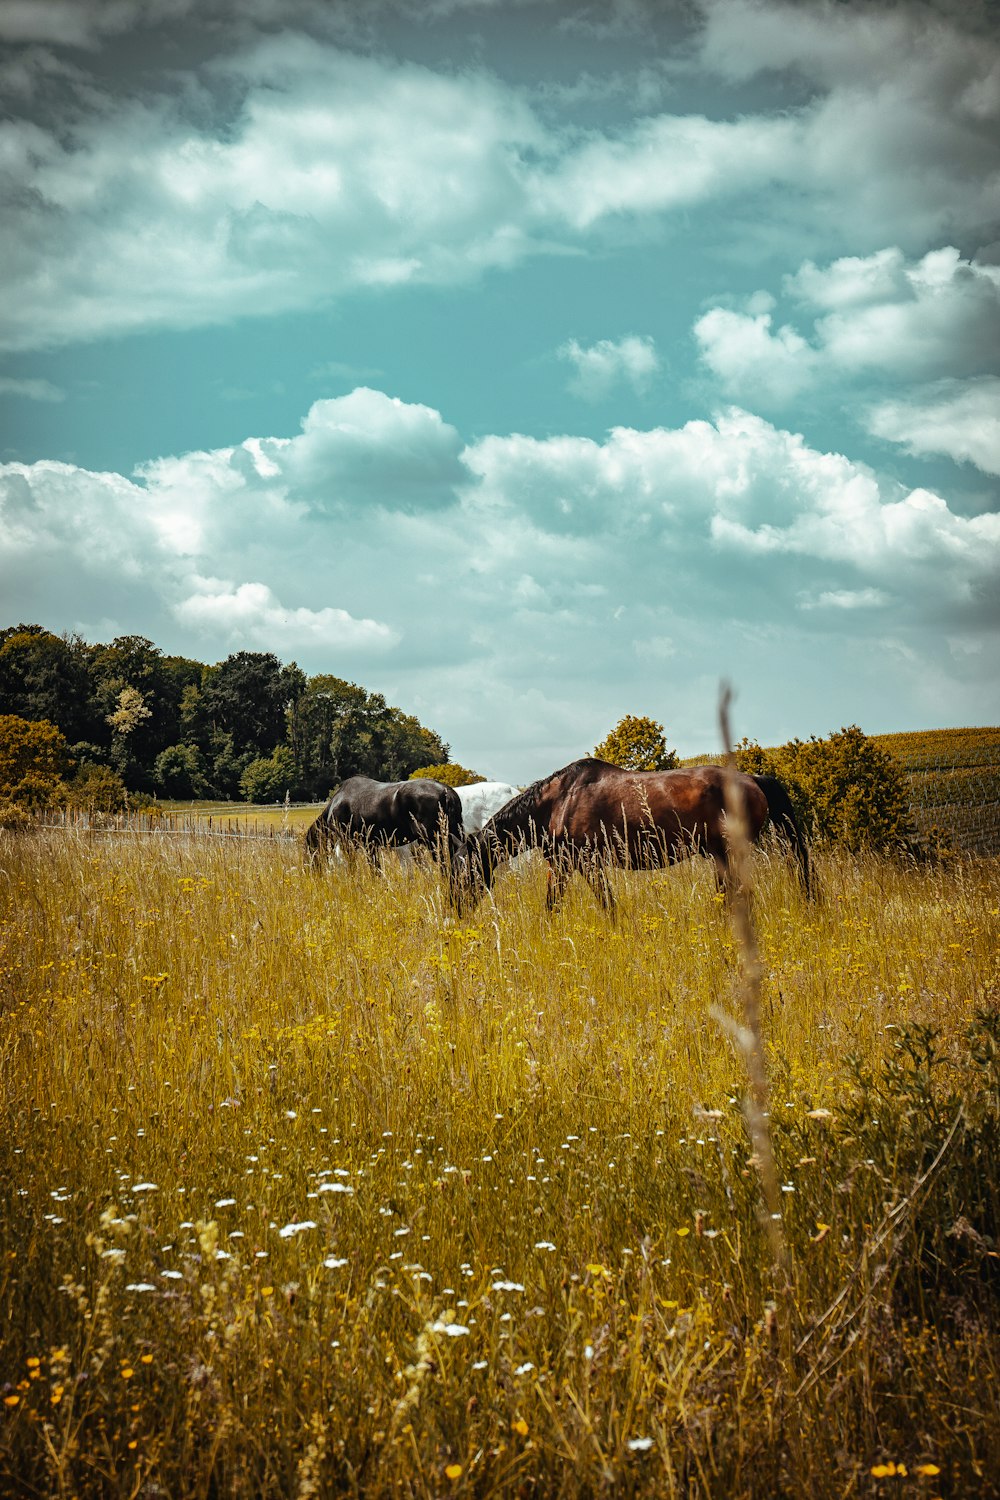 brown and black horses on green grass field under blue and white cloudy sky during daytime